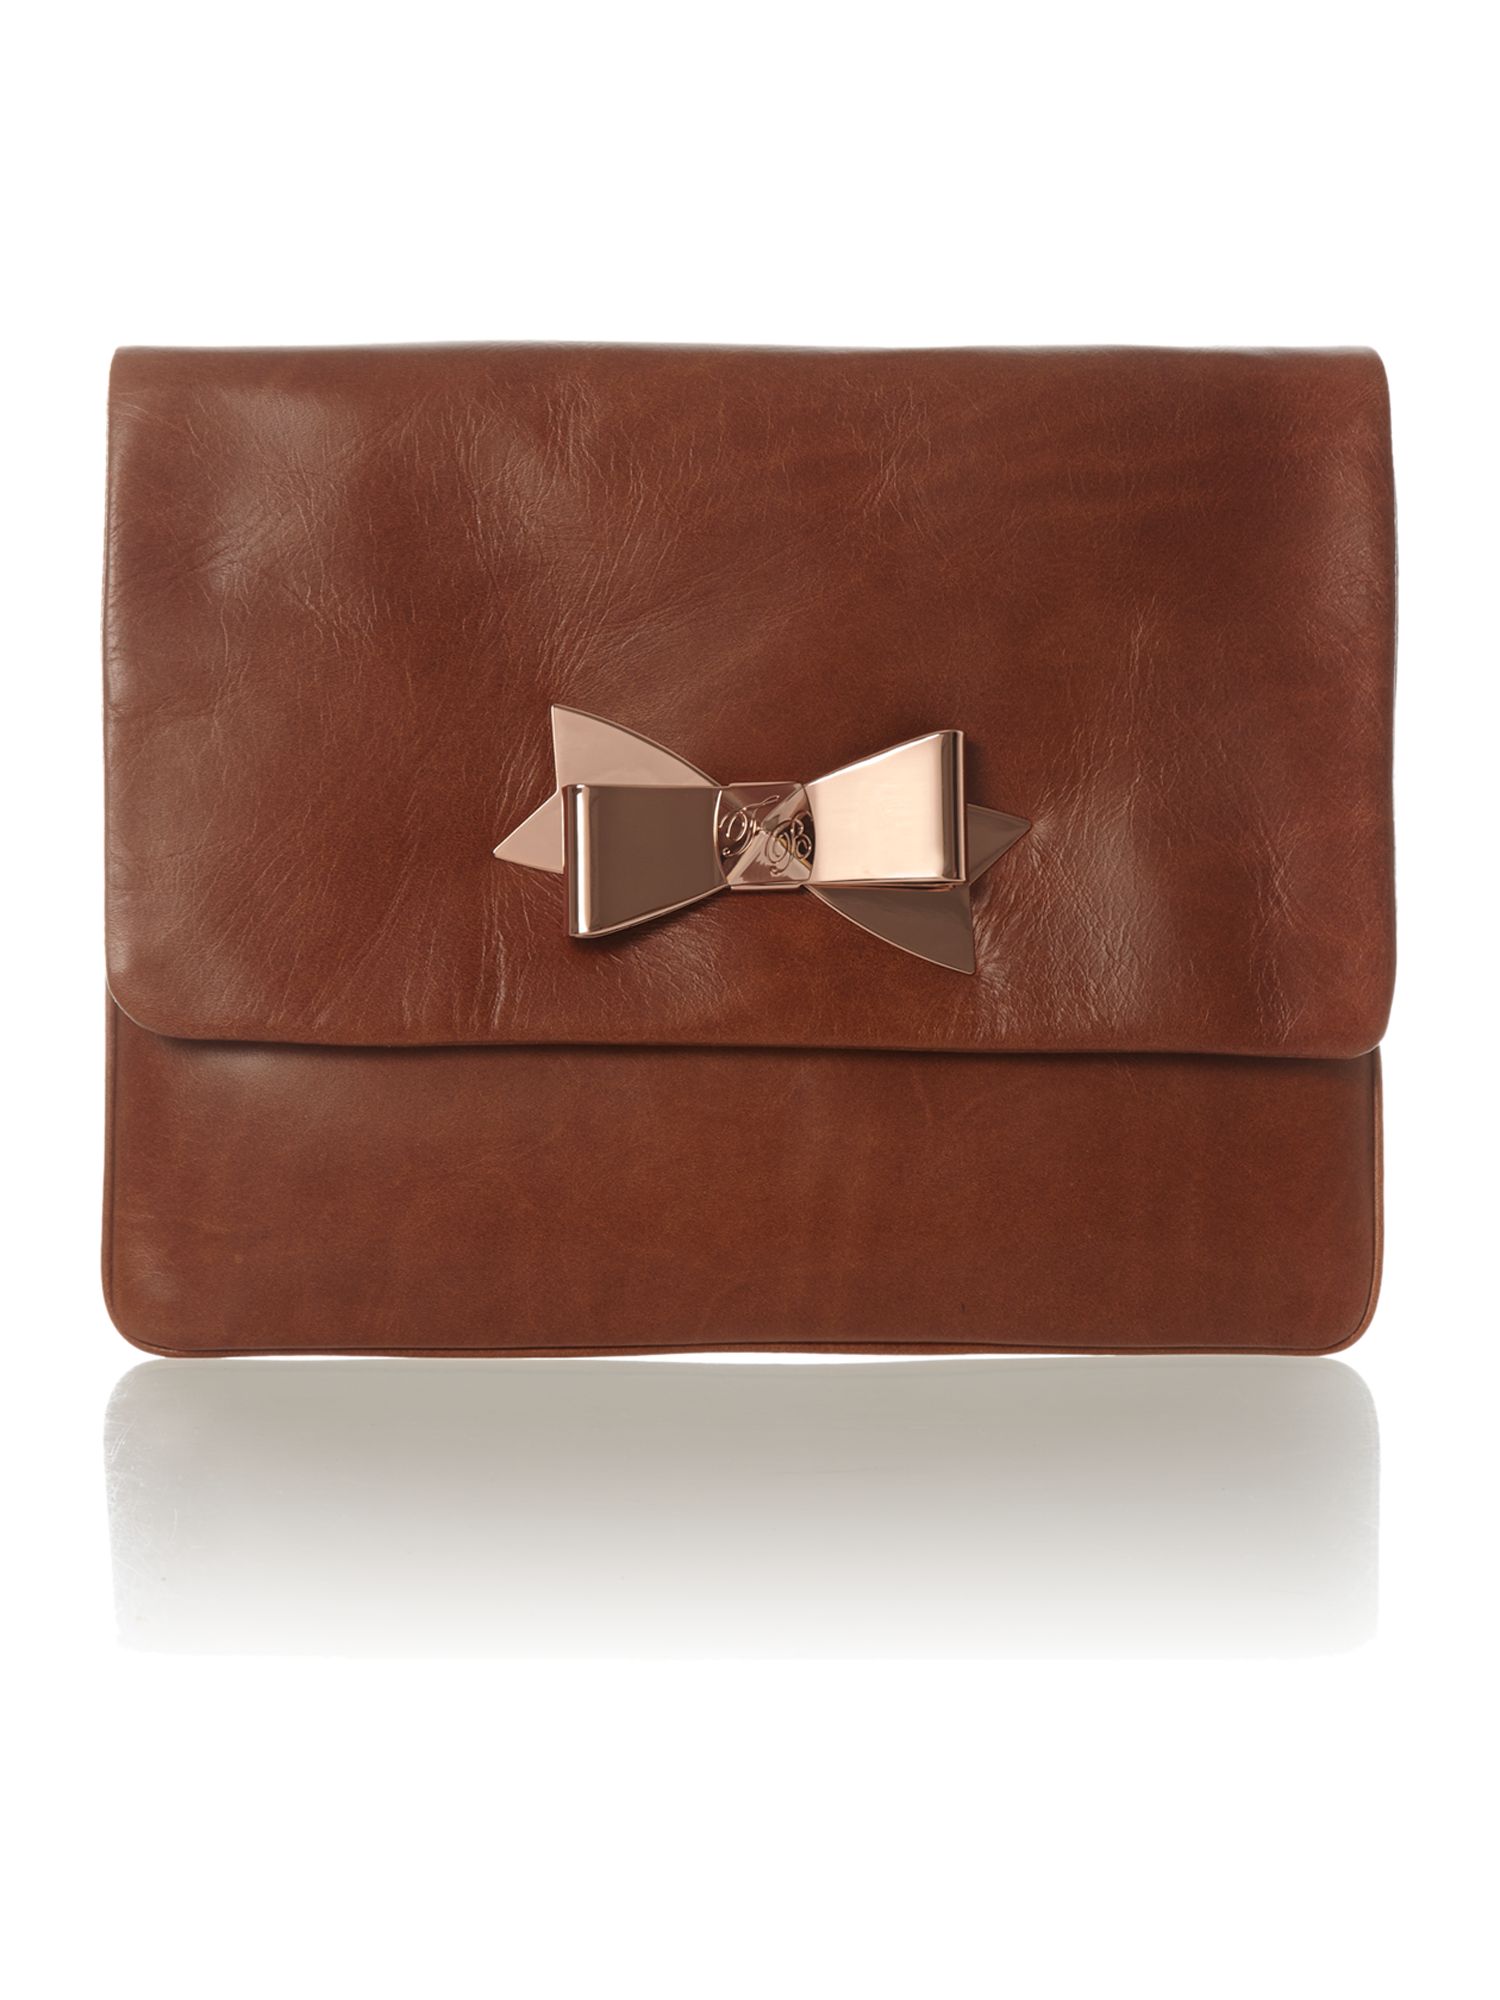 Ted Baker Bow Leather Clutch Bag in Brown | Lyst